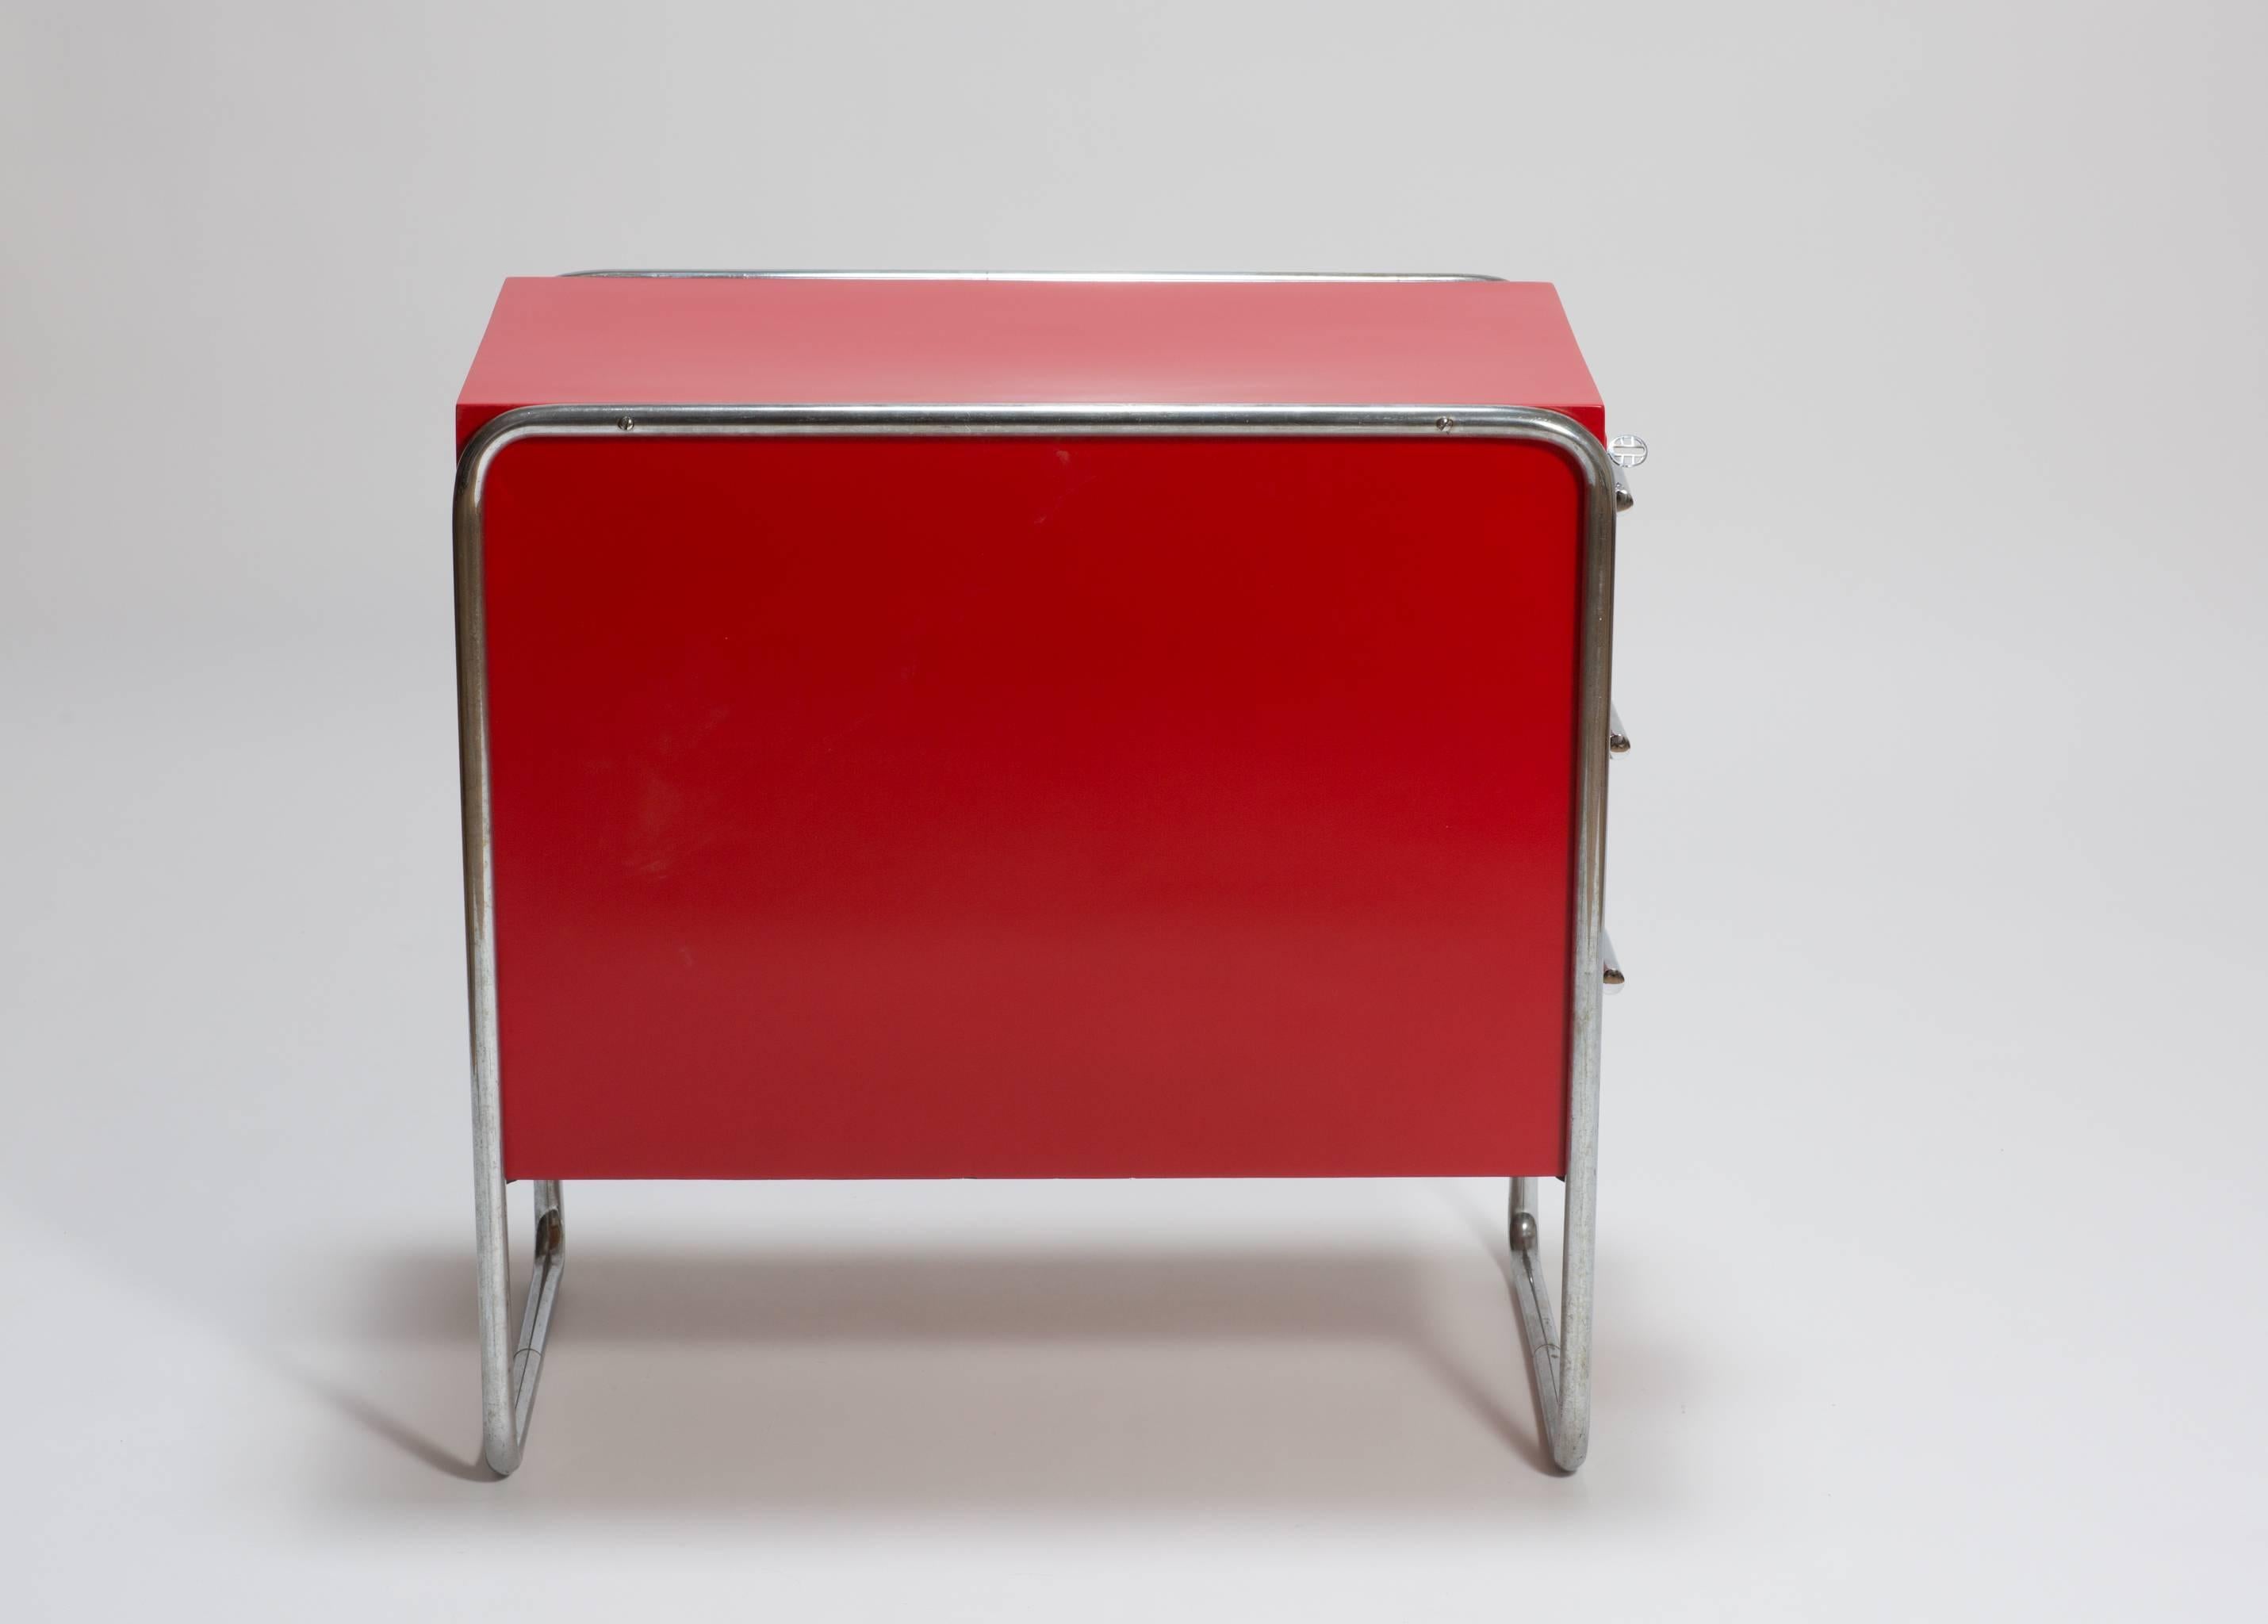 Czech Red Midcentury Design Bauhaus Writing Desk Container by Marcel Breuer, 1930 For Sale